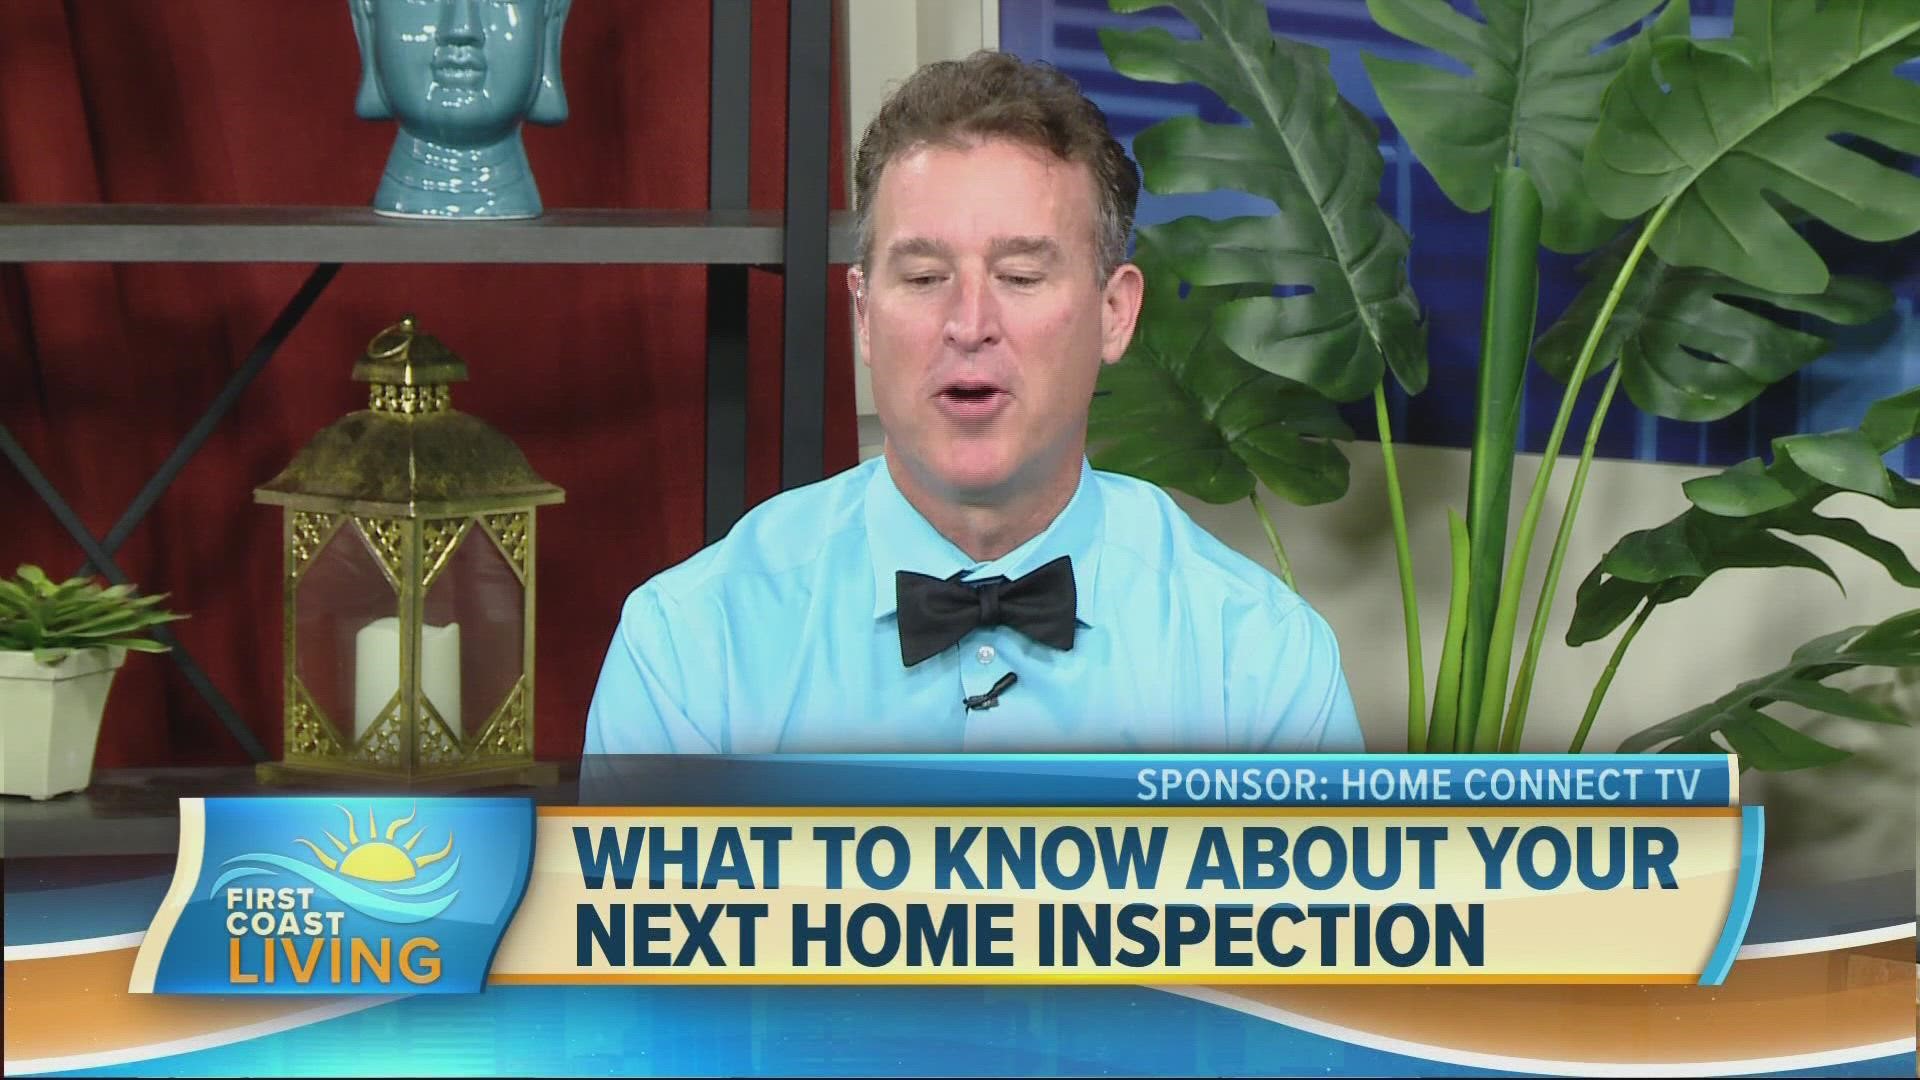 Michael Munn, Owner of BiltRite Home Inspections joins First Coast Living and eases your fears when it comes to home inspections.